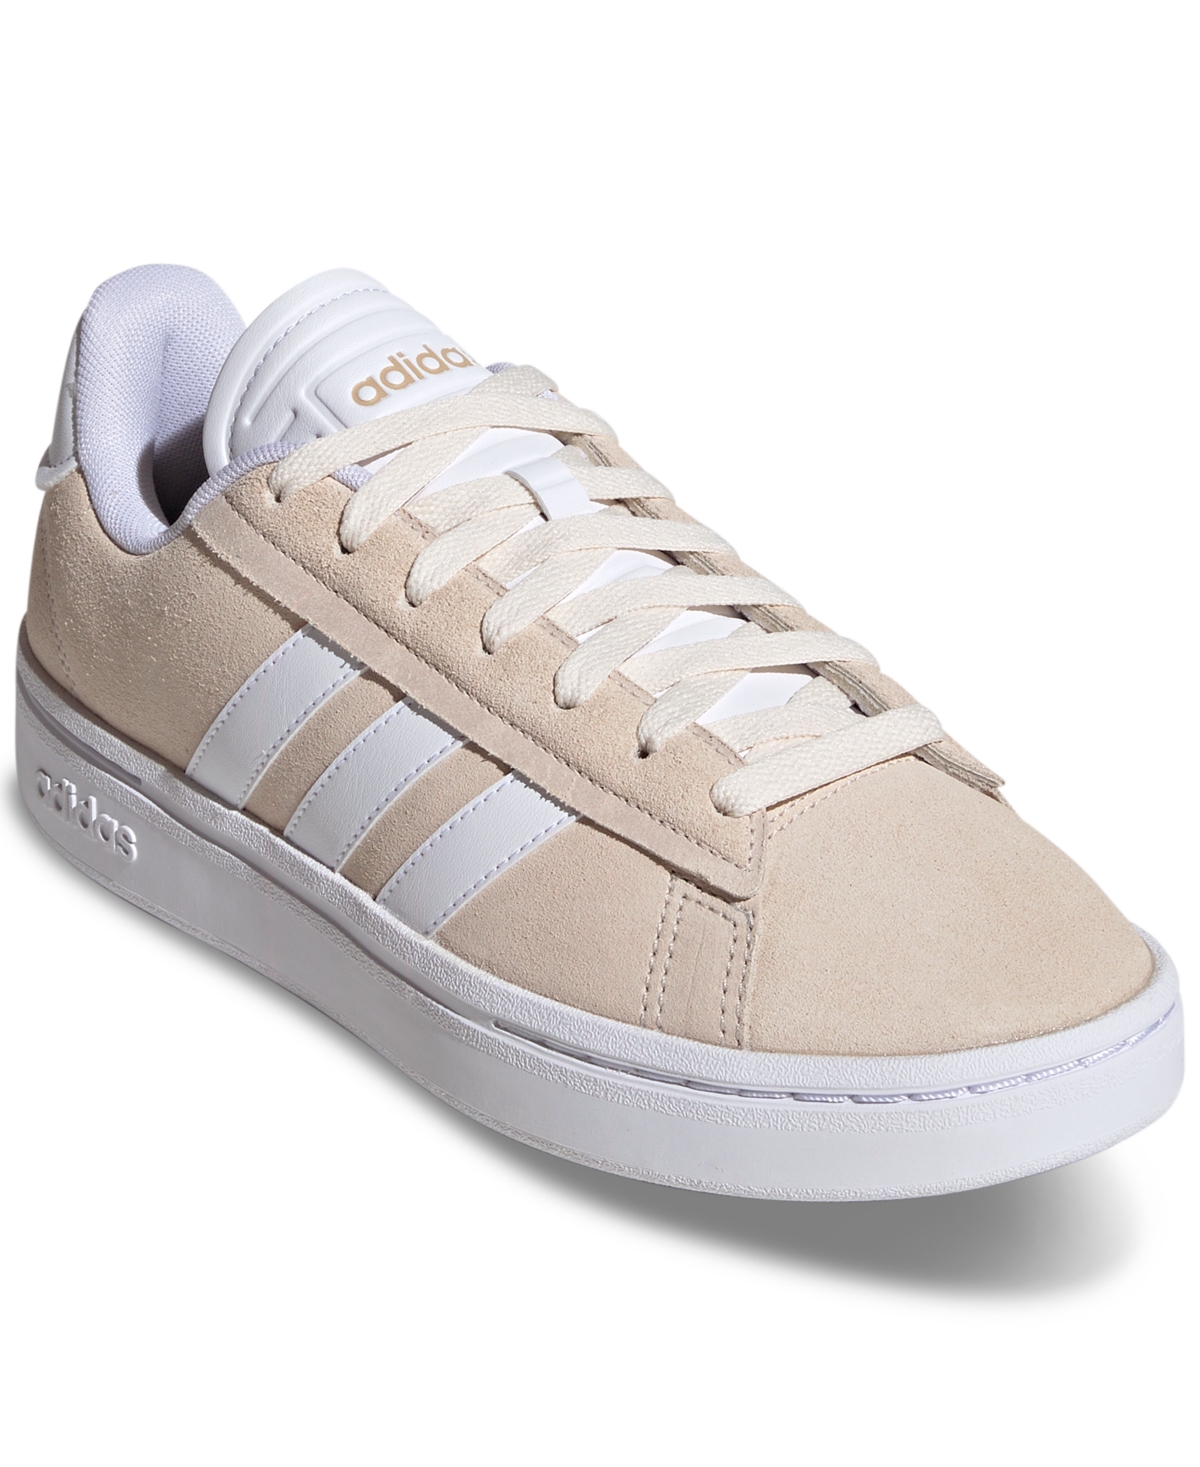 Adidas Originals Women's Grand Court Alpha Cloudfoam Lifestyle Comfort Casual Sneakers From Finish Line In Wonder White,white,magic